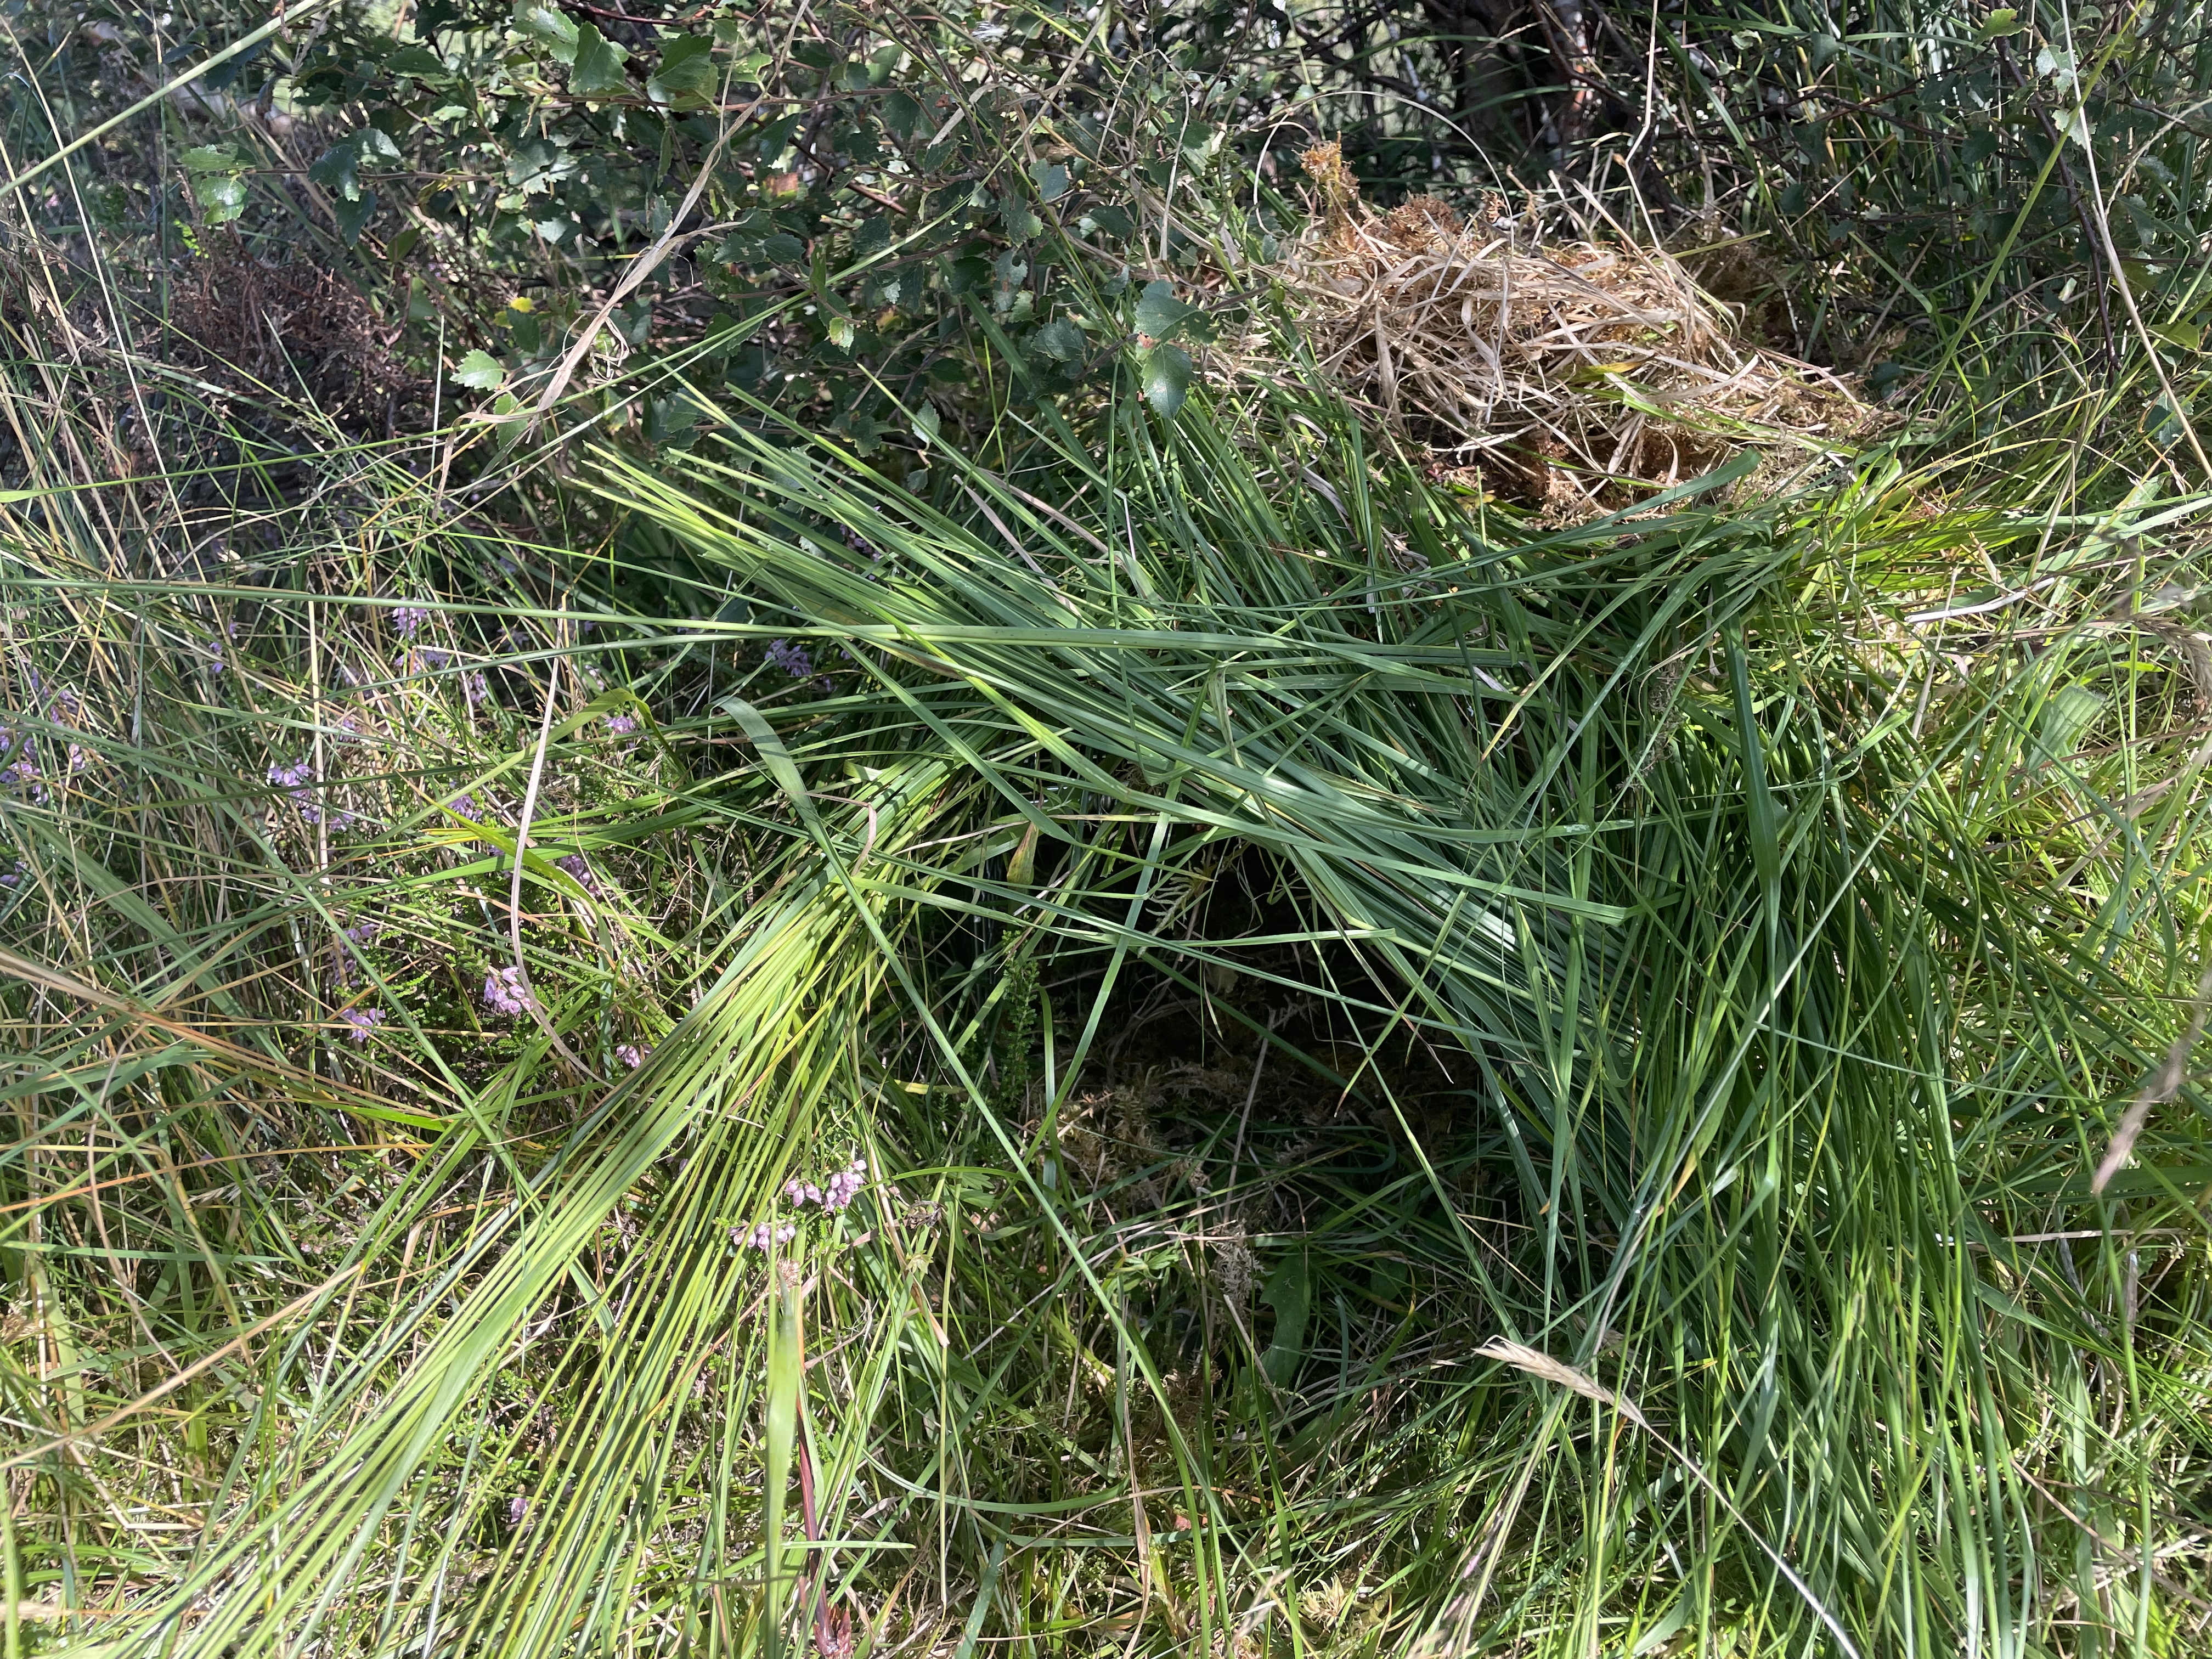 Mink trap disguised with grass and vegetation